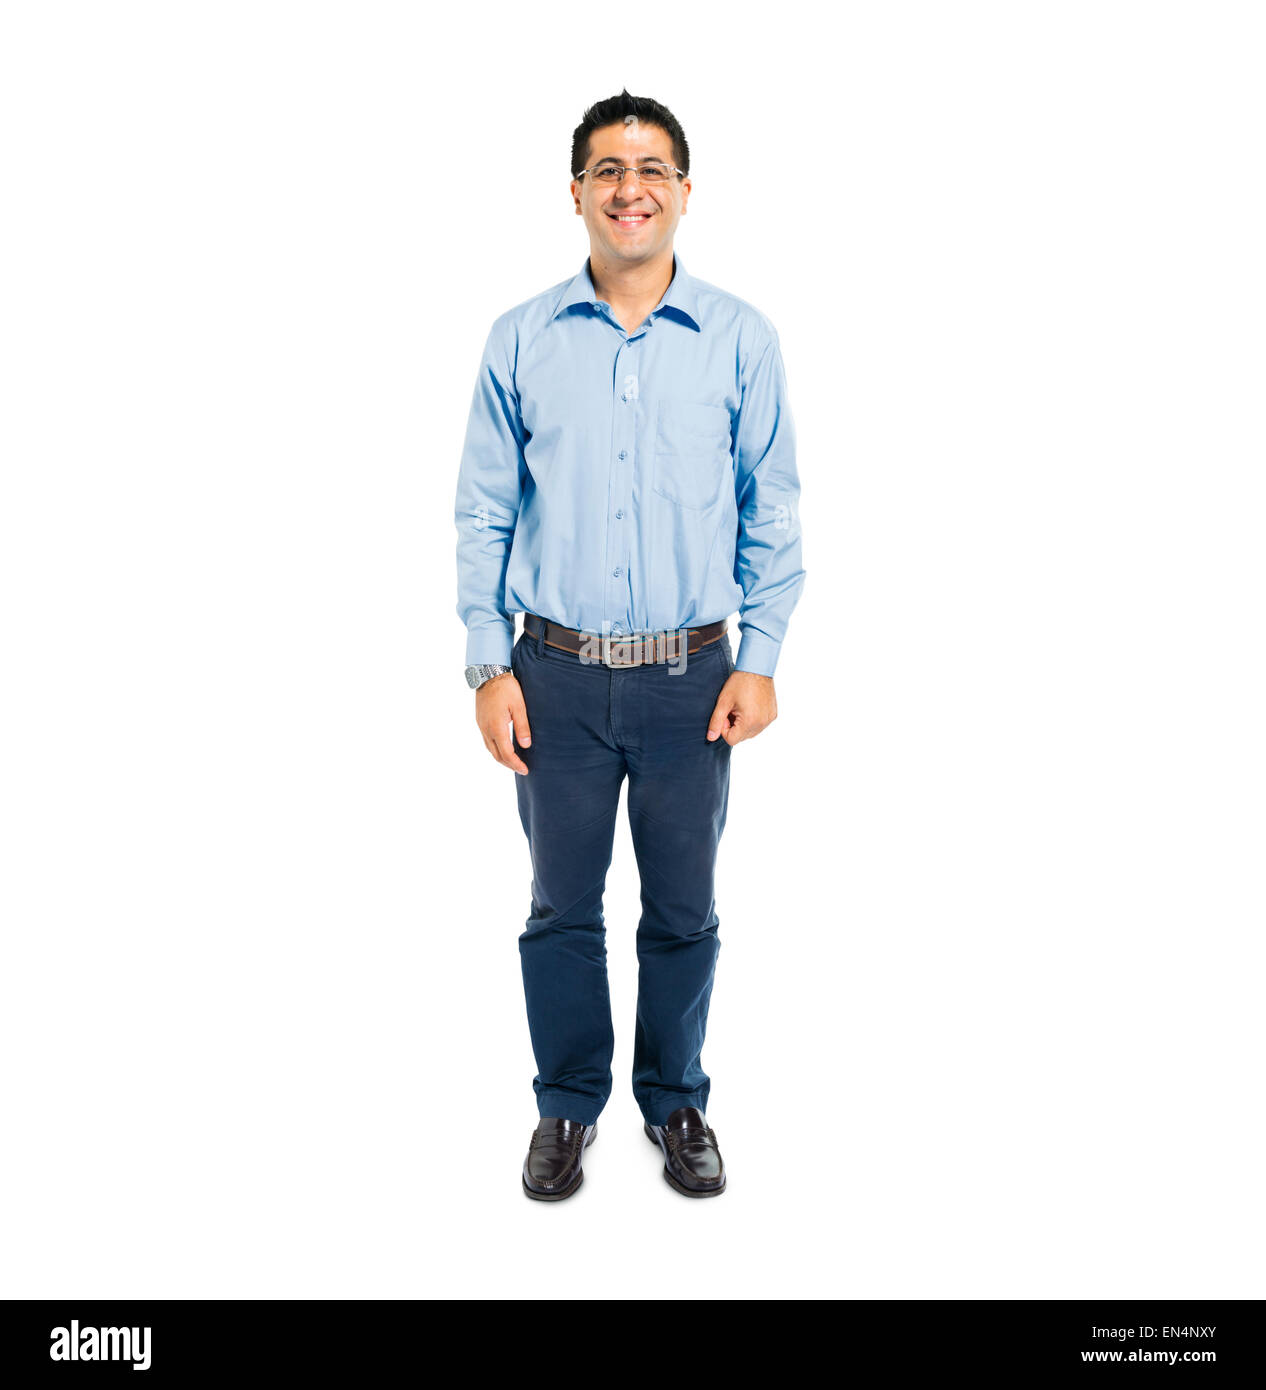 Homme confiant Standing and Smiling Banque D'Images